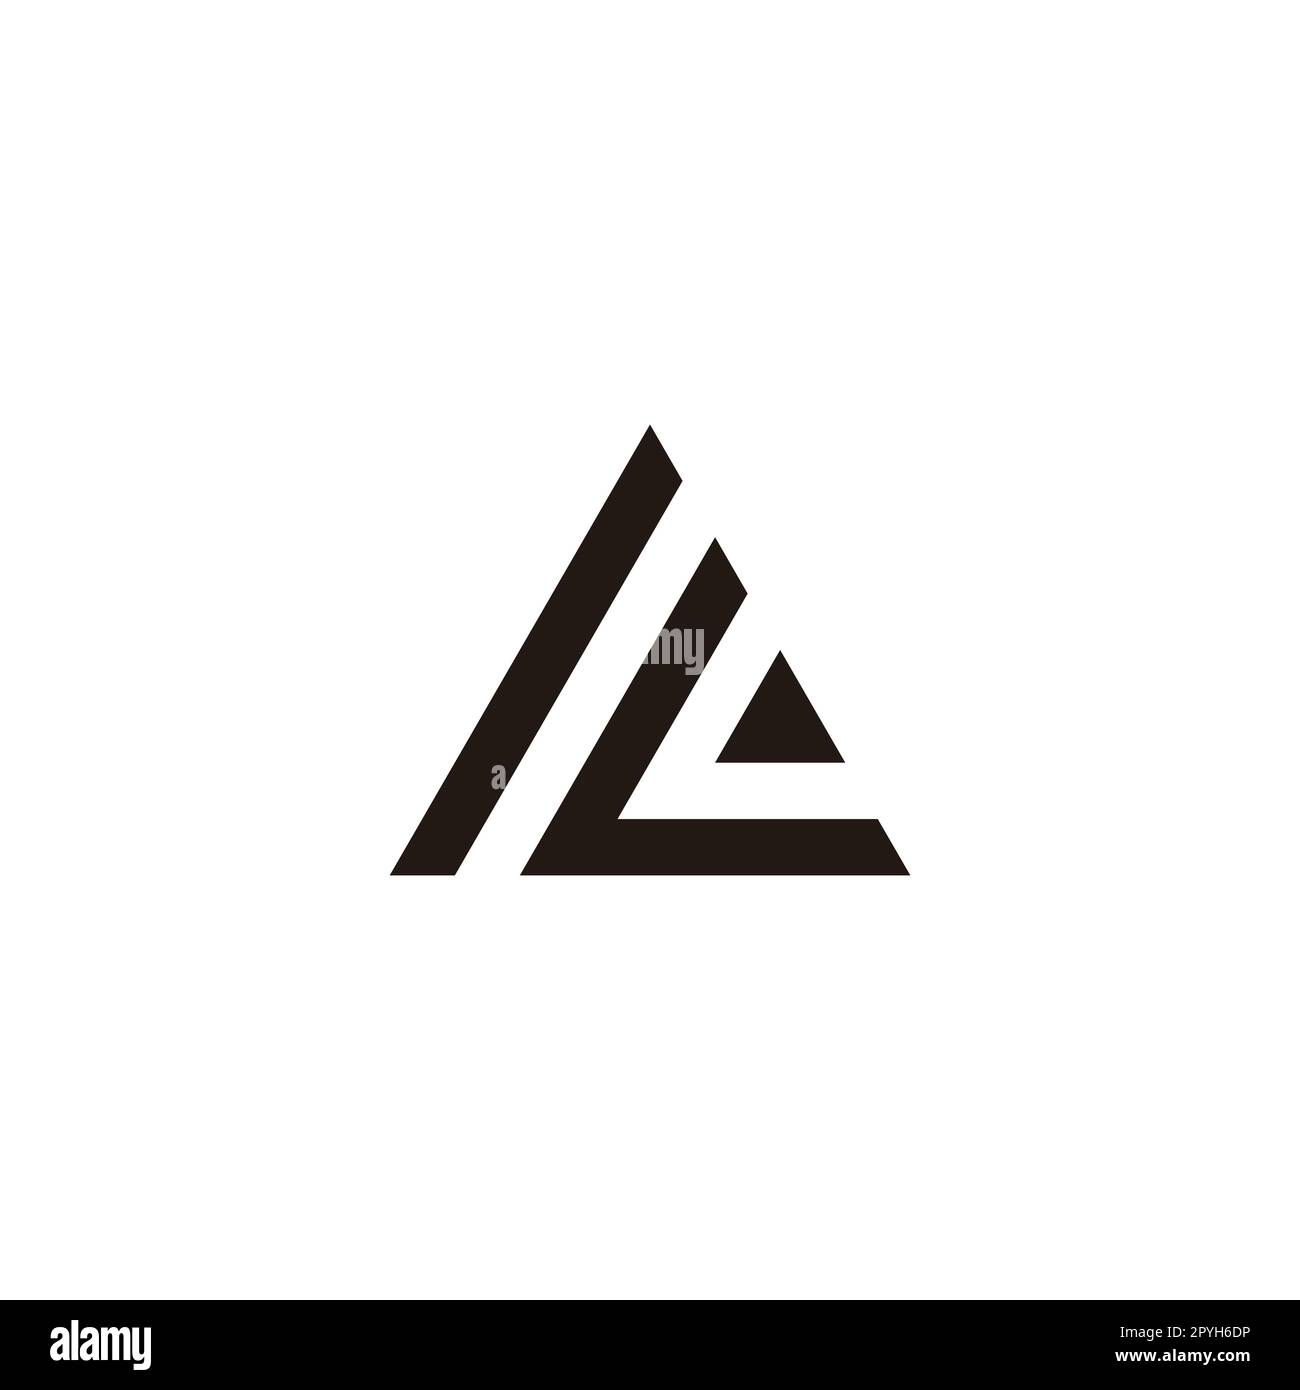 Letter M and L triangle geometric symbol simple logo vector Stock ...